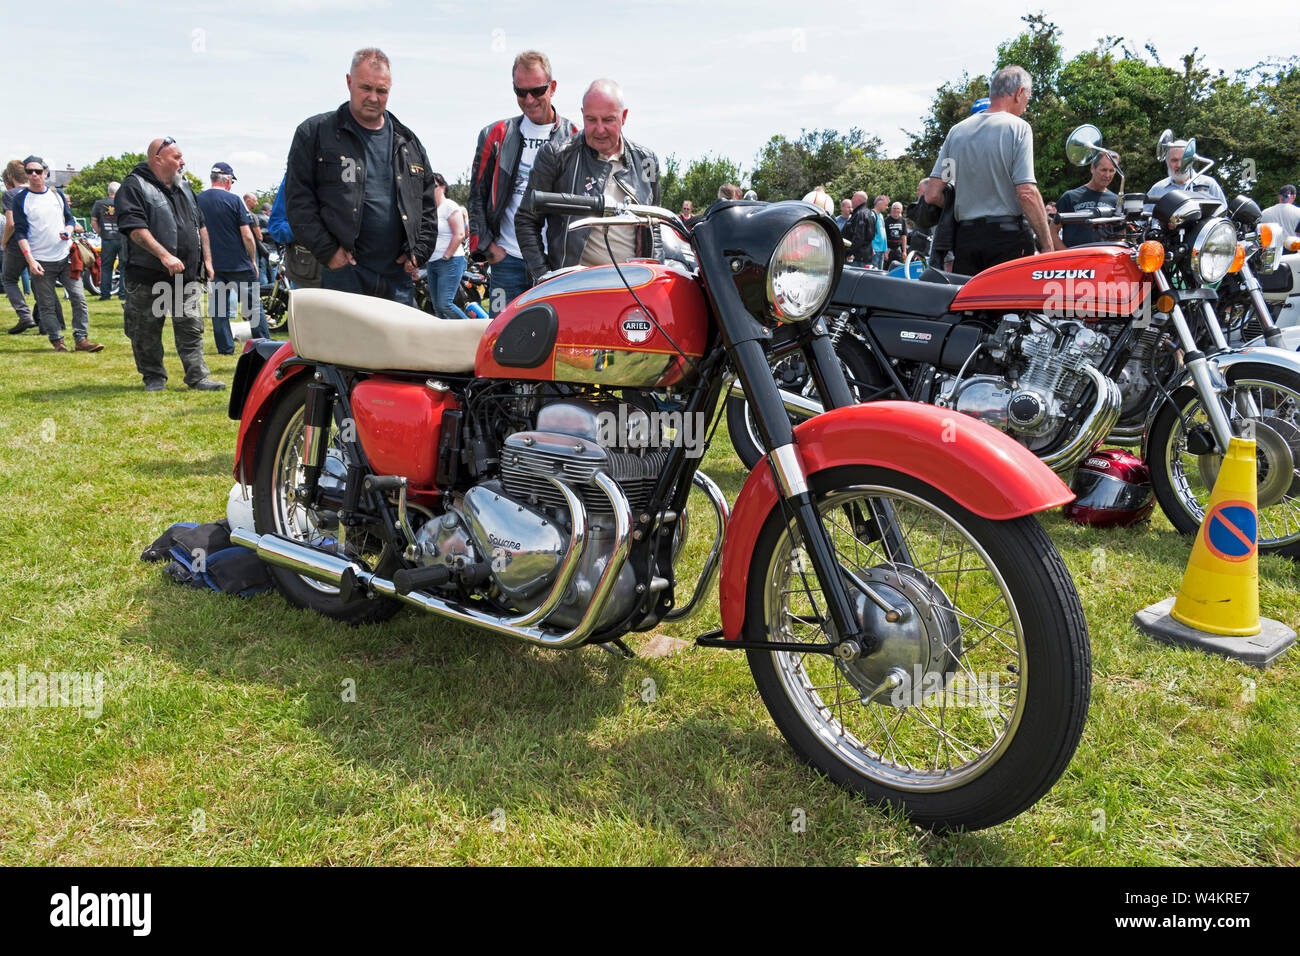 1950s Ariel Square Four motorcycle at a classic motorbike show in cornwall, england, uk. Stock Photo